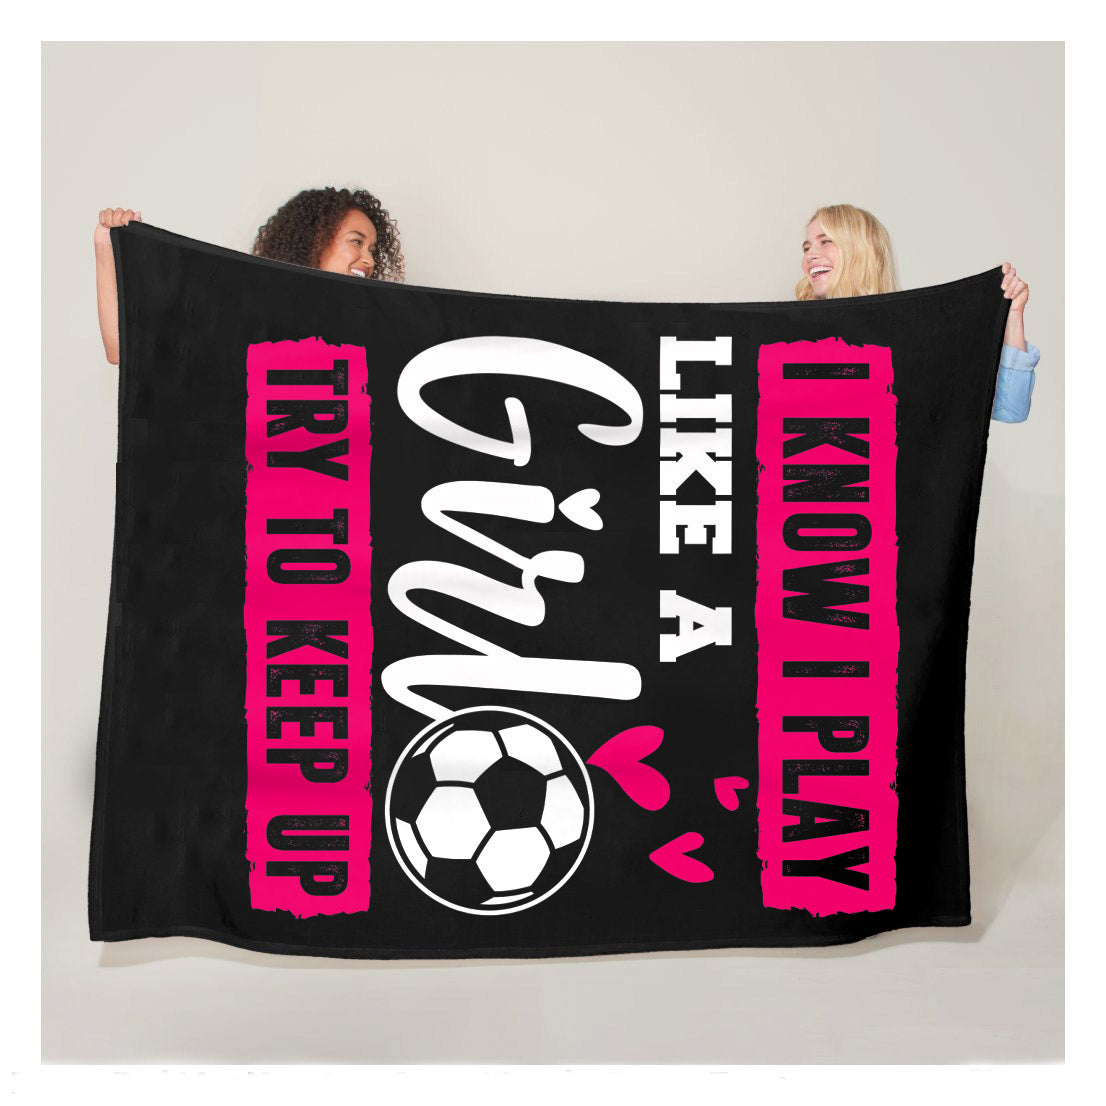 I Know I Play Like A Girl Soccer Try To Keep Up Fleece Blanket,  Soccer Outdoor Blankets, Soccer Gifts For Coach And Soccer Players, Birthday Gift For Soccer Player